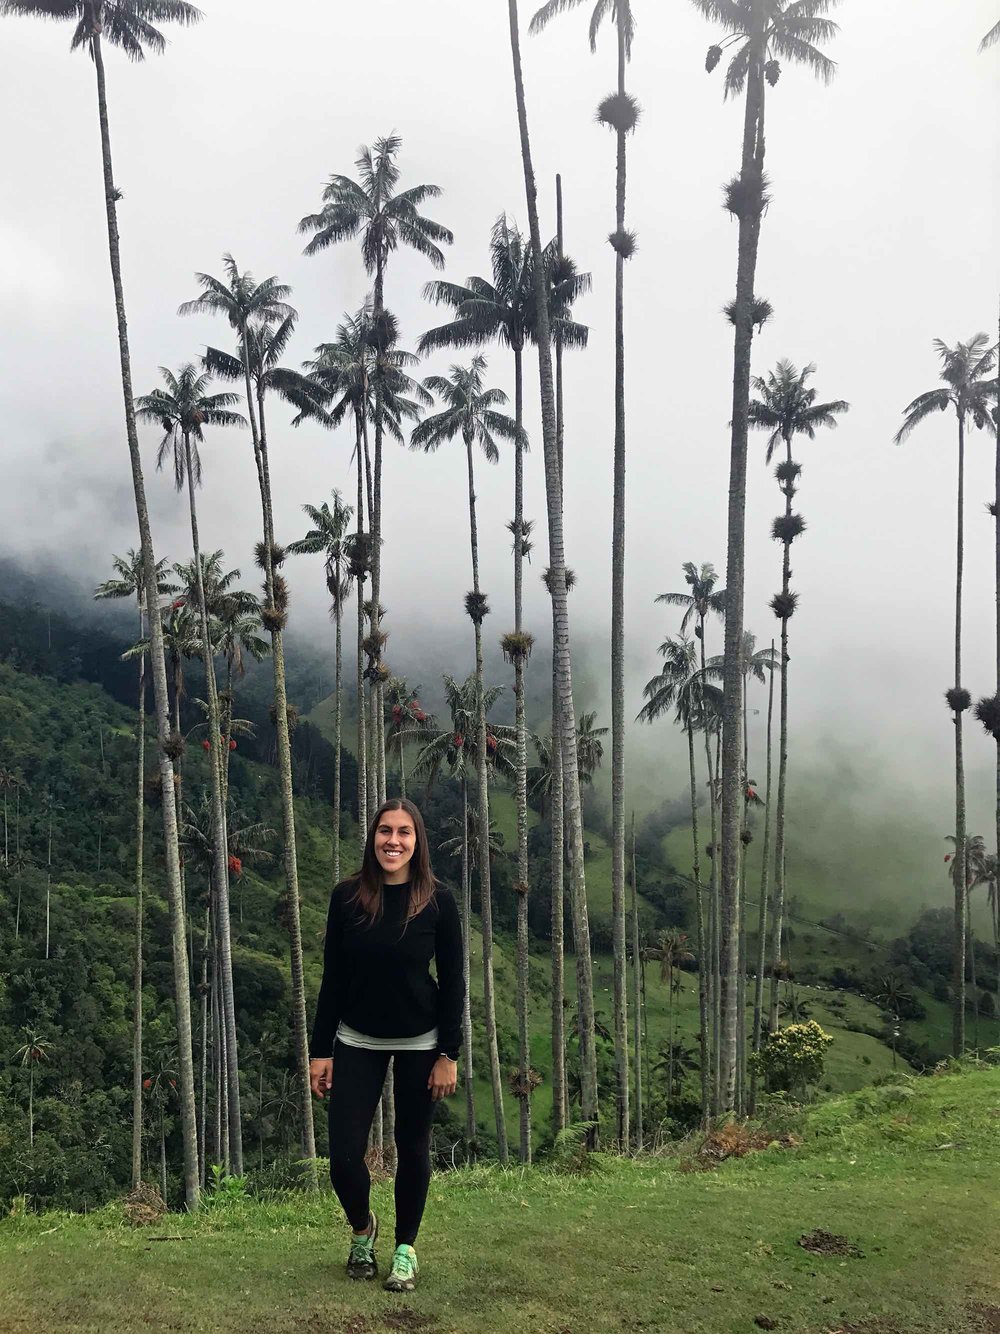 Wax Palm Trees | Cocora Valley, Colombia